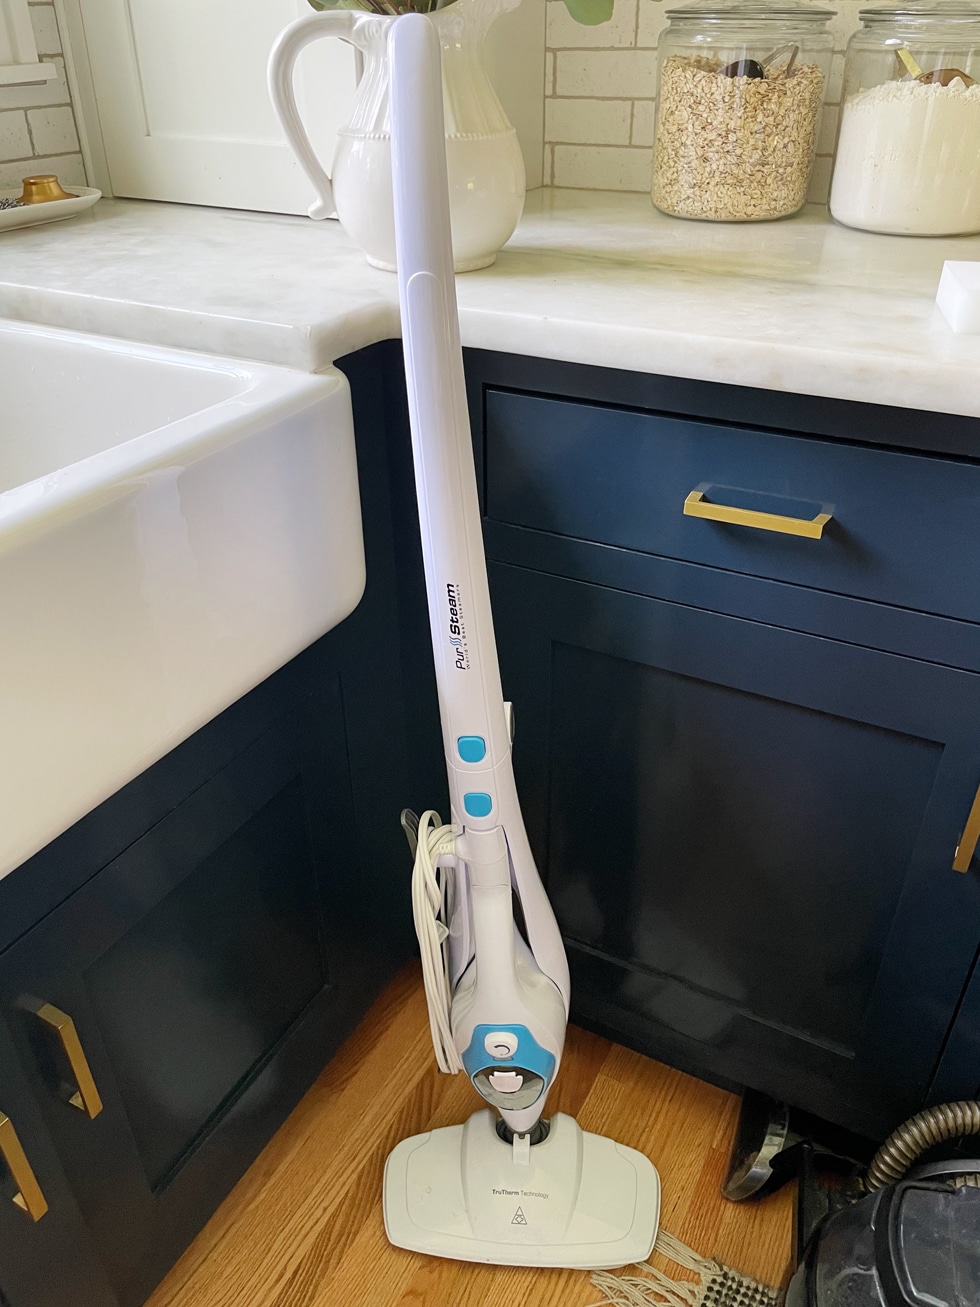 My Favorite Cleaning Tools and Gadgets That Make Life Easier!